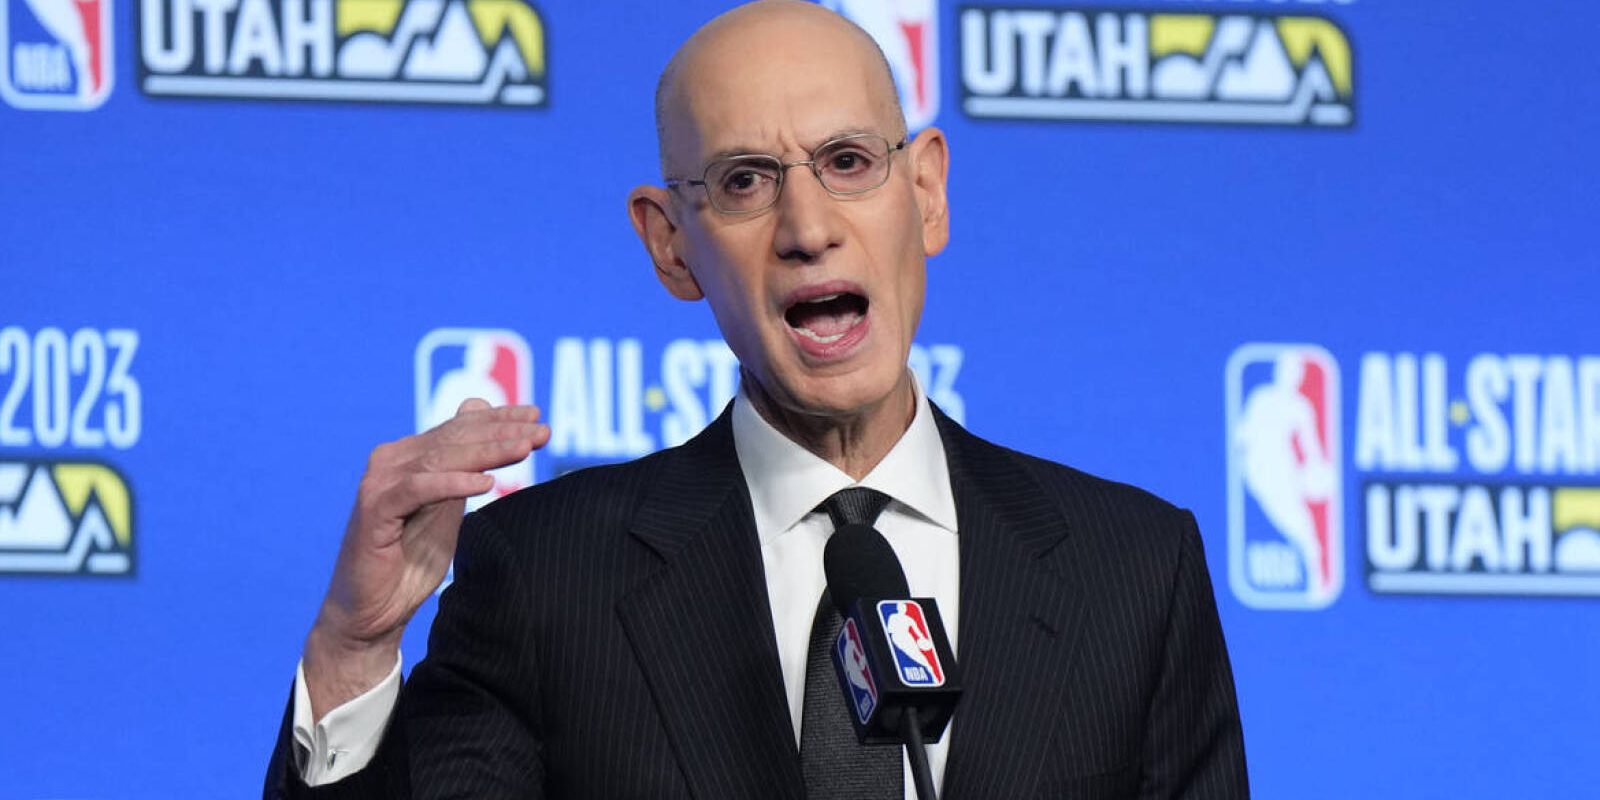 Feb 18, 2023; Salt Lake City, UT, USA; NBA commissioner Adam Silver speaks in a press conference during the 2023 All Star Saturday Night at Vivint Arena. Mandatory Credit: Kirby Lee-USA TODAY Sports